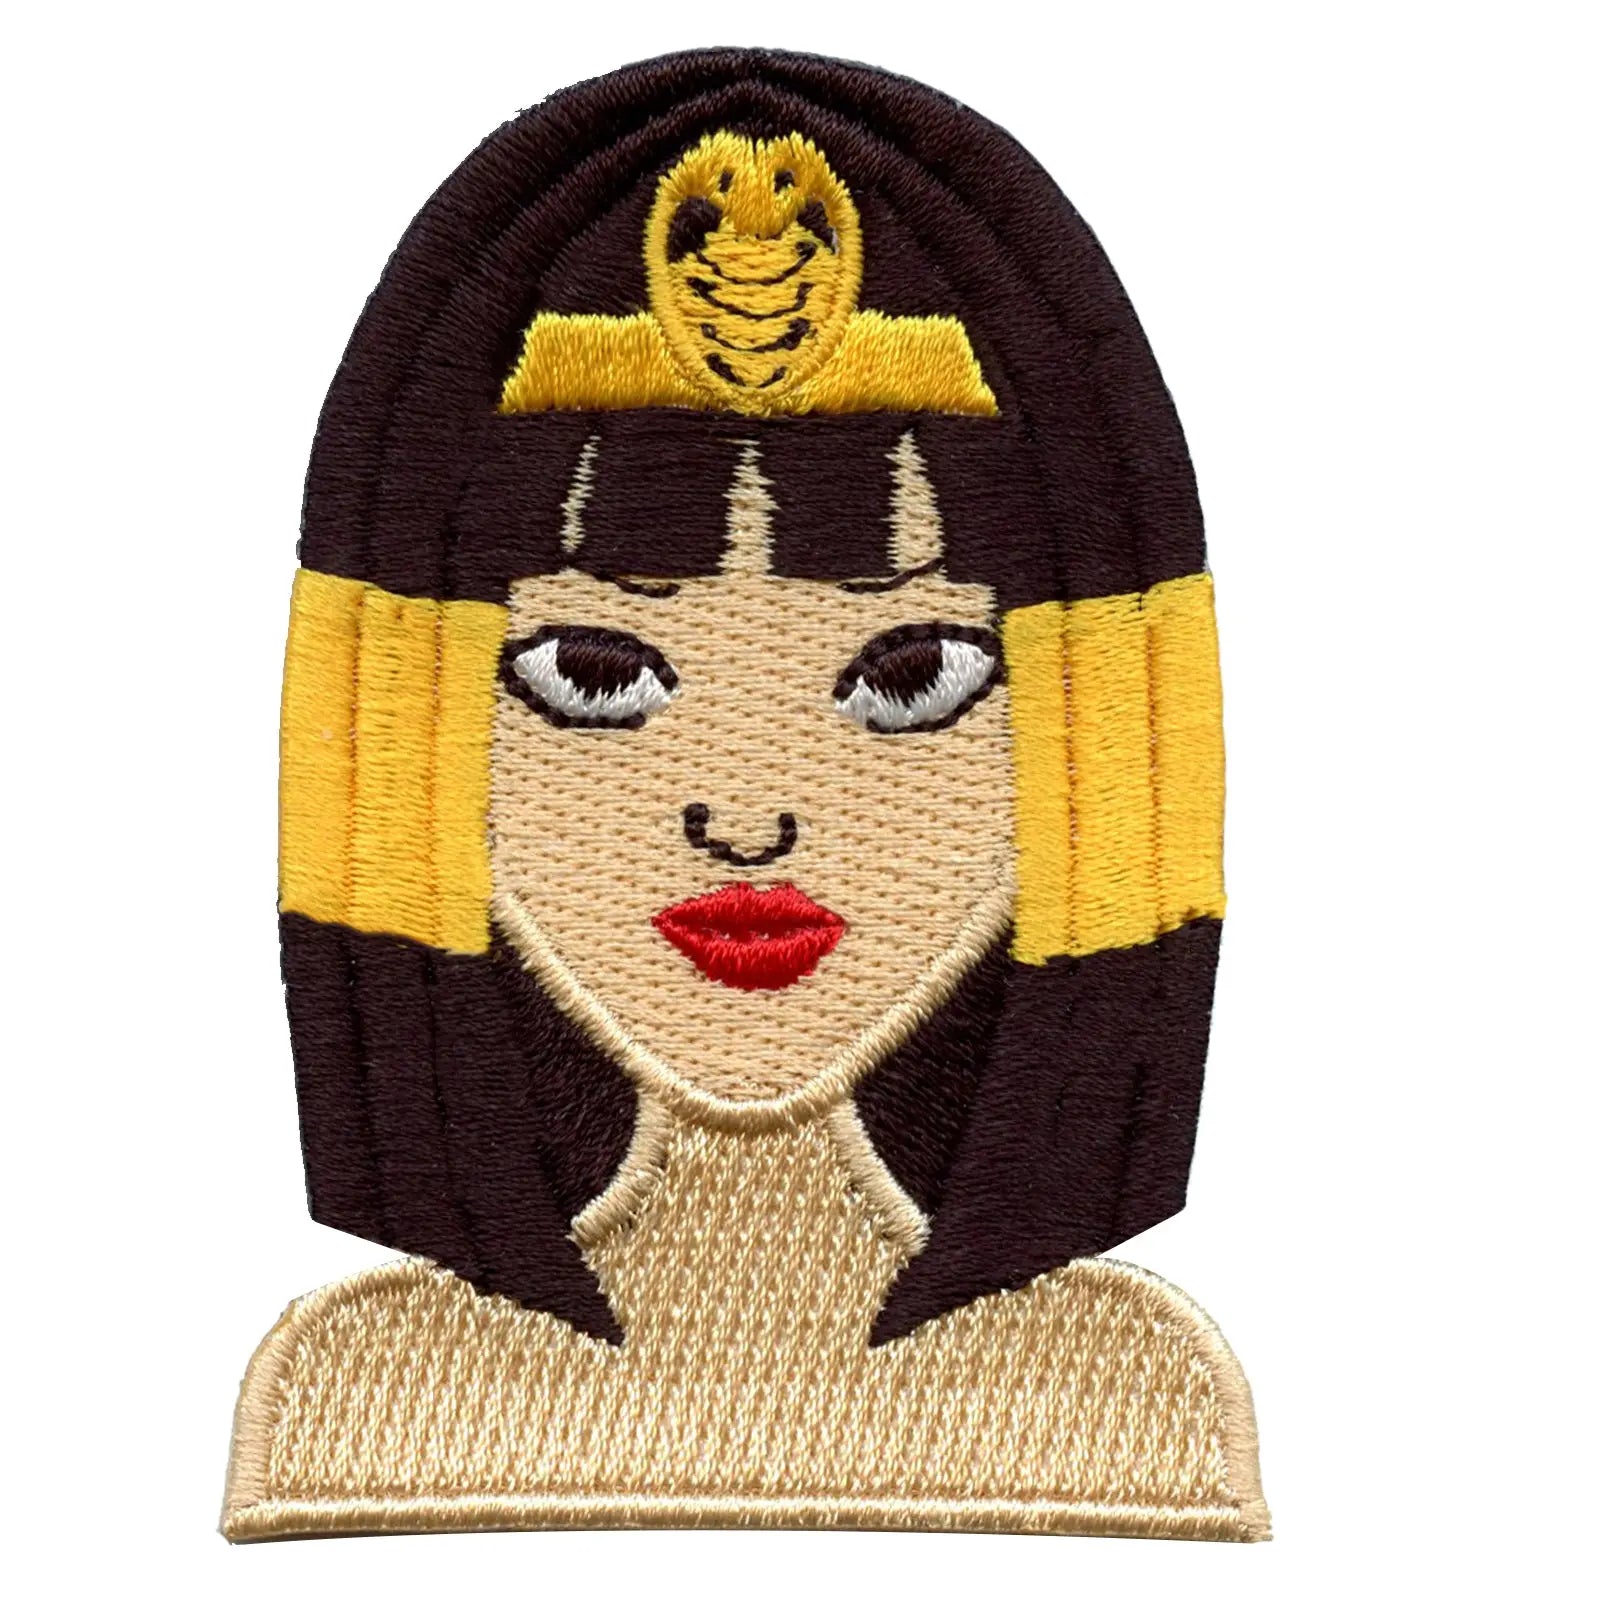 Cleopatra Portrait Embroidered Iron On Patch 